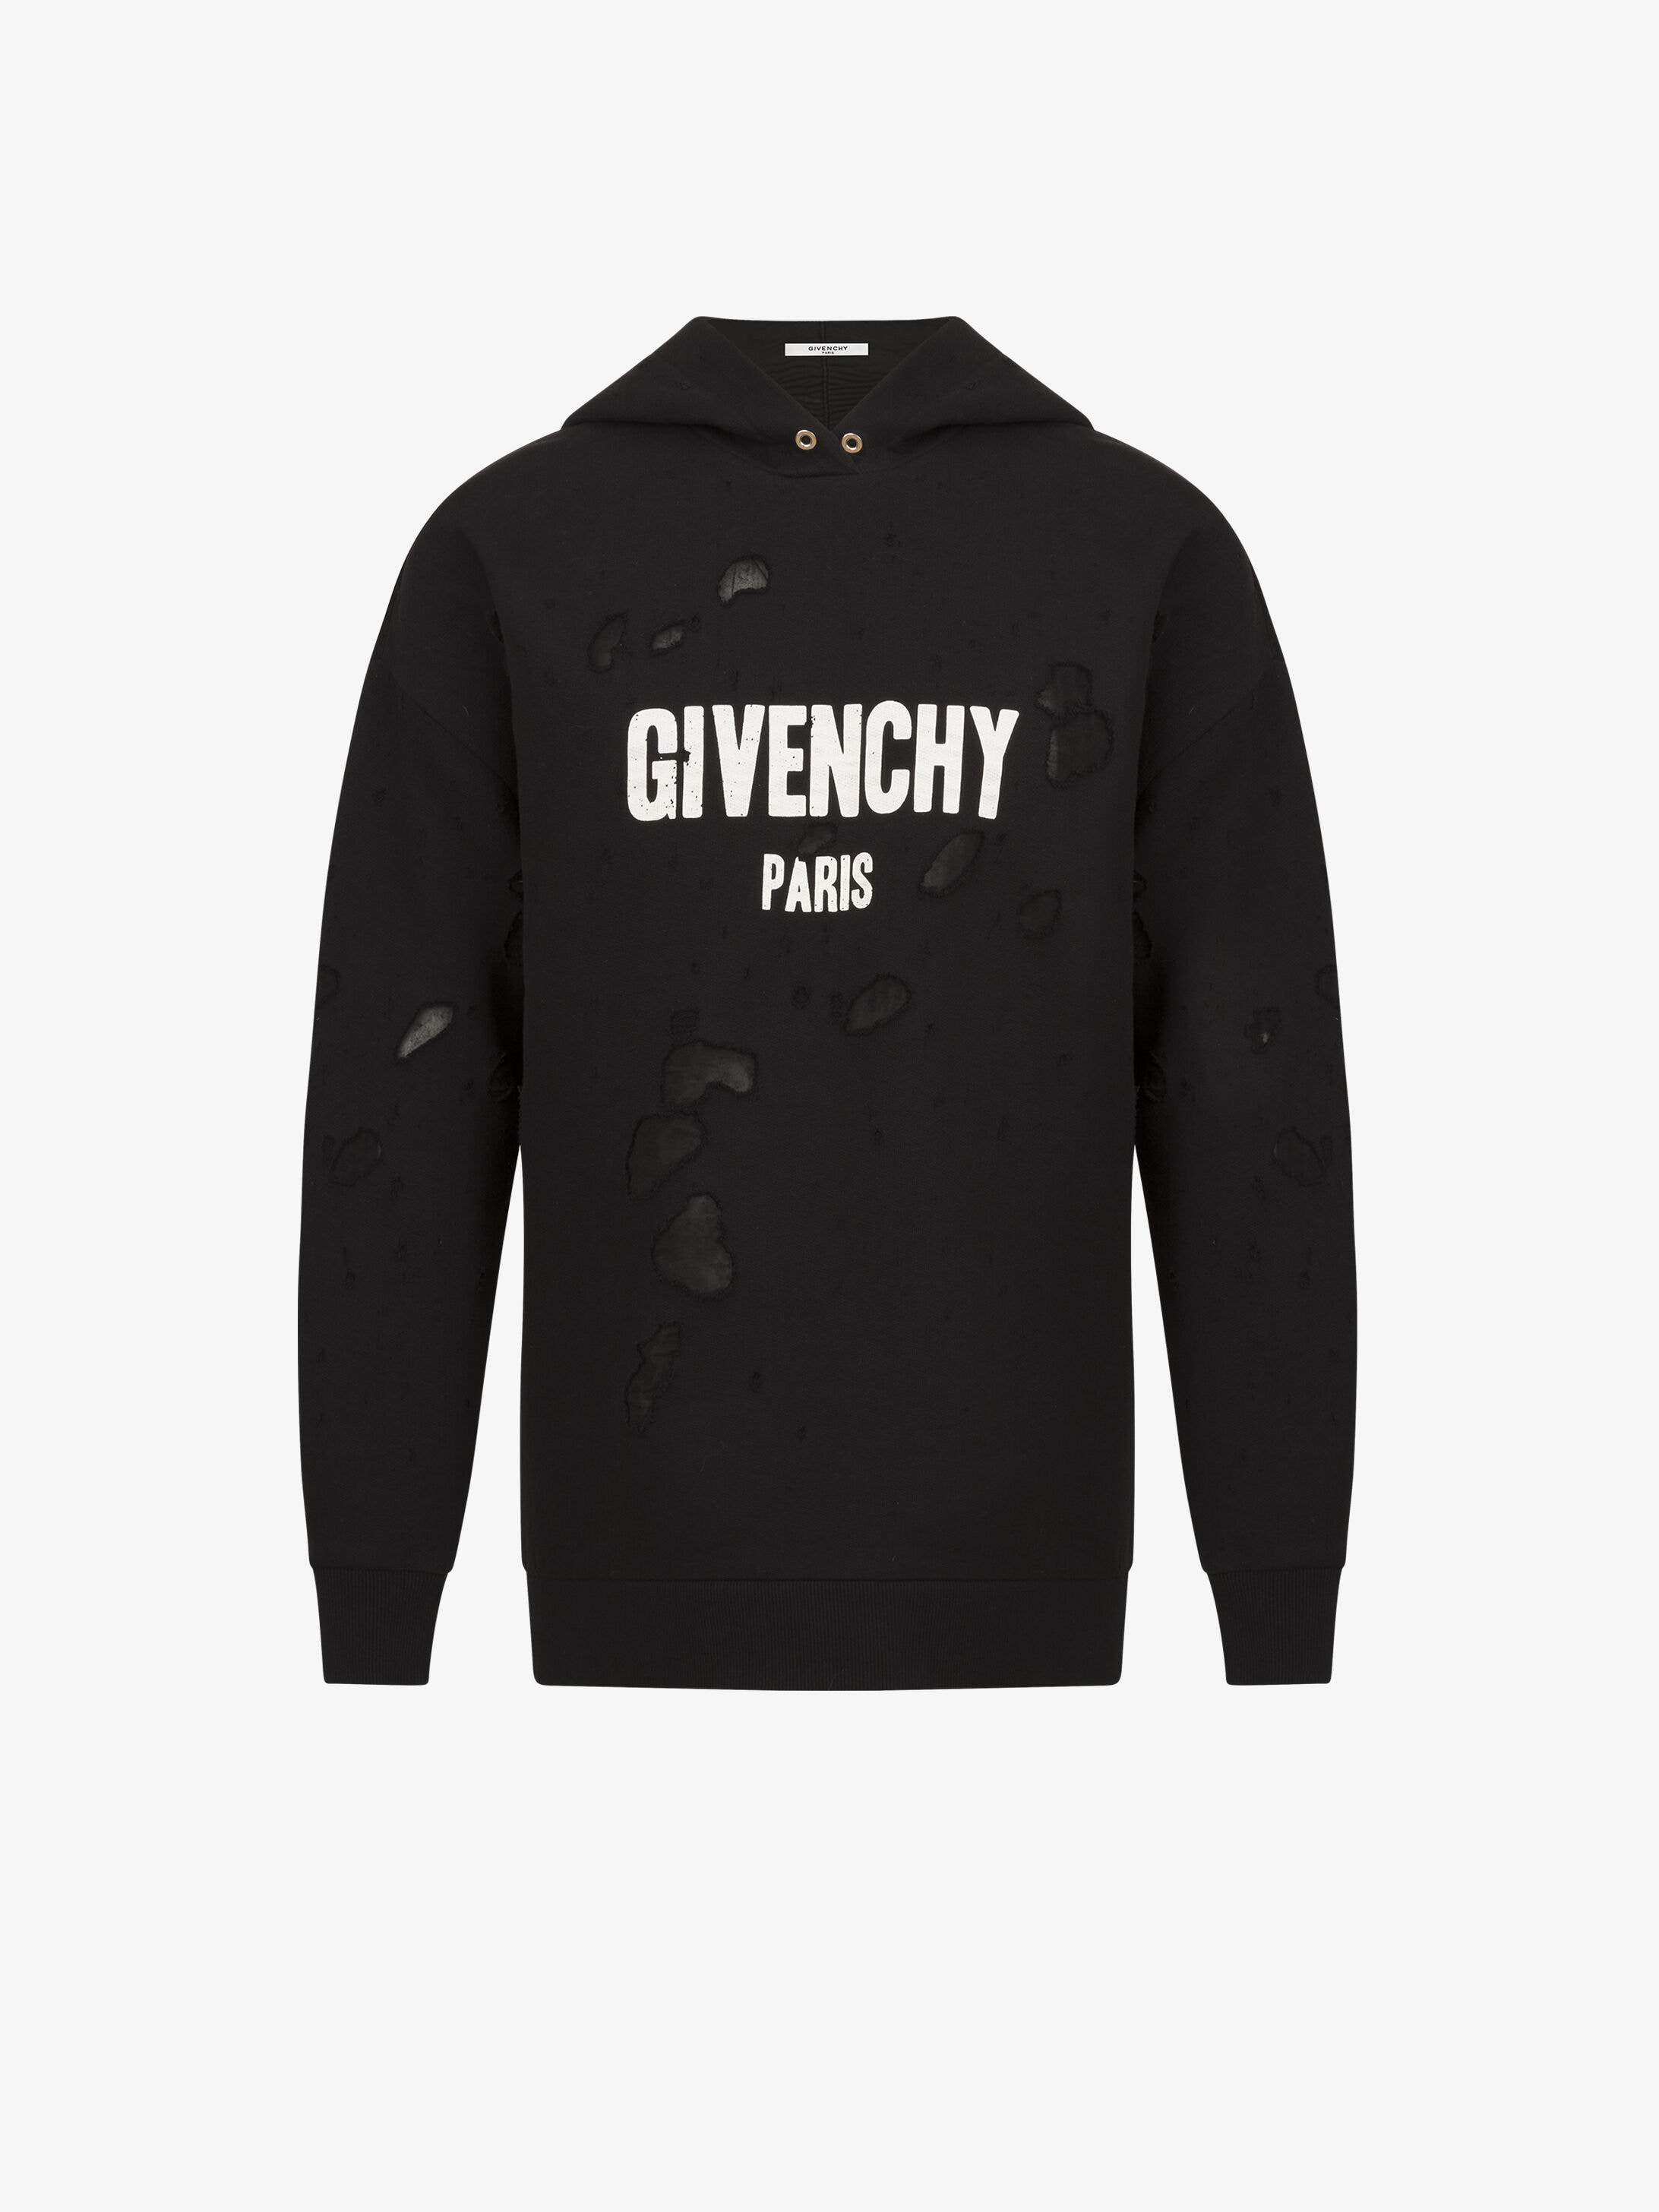 Givenchy Women S Size Chart